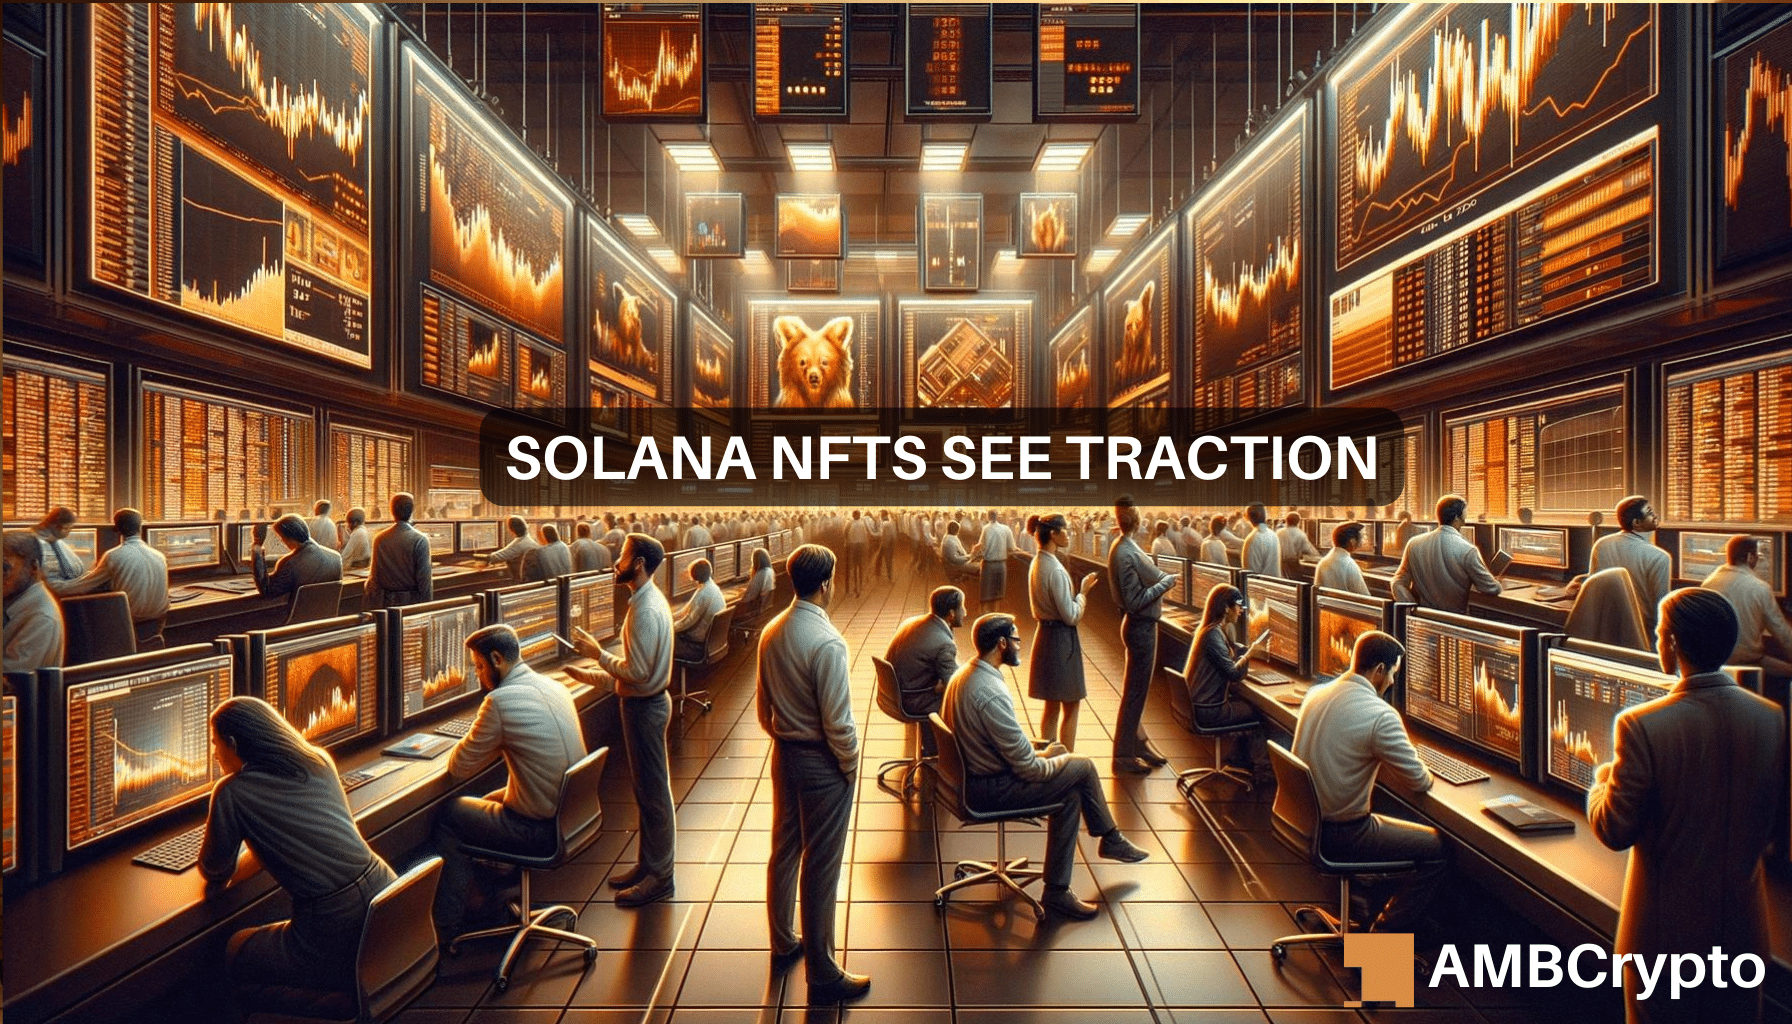 Solana NFTs jump 30% in 24 hours: What’s behind the surge?